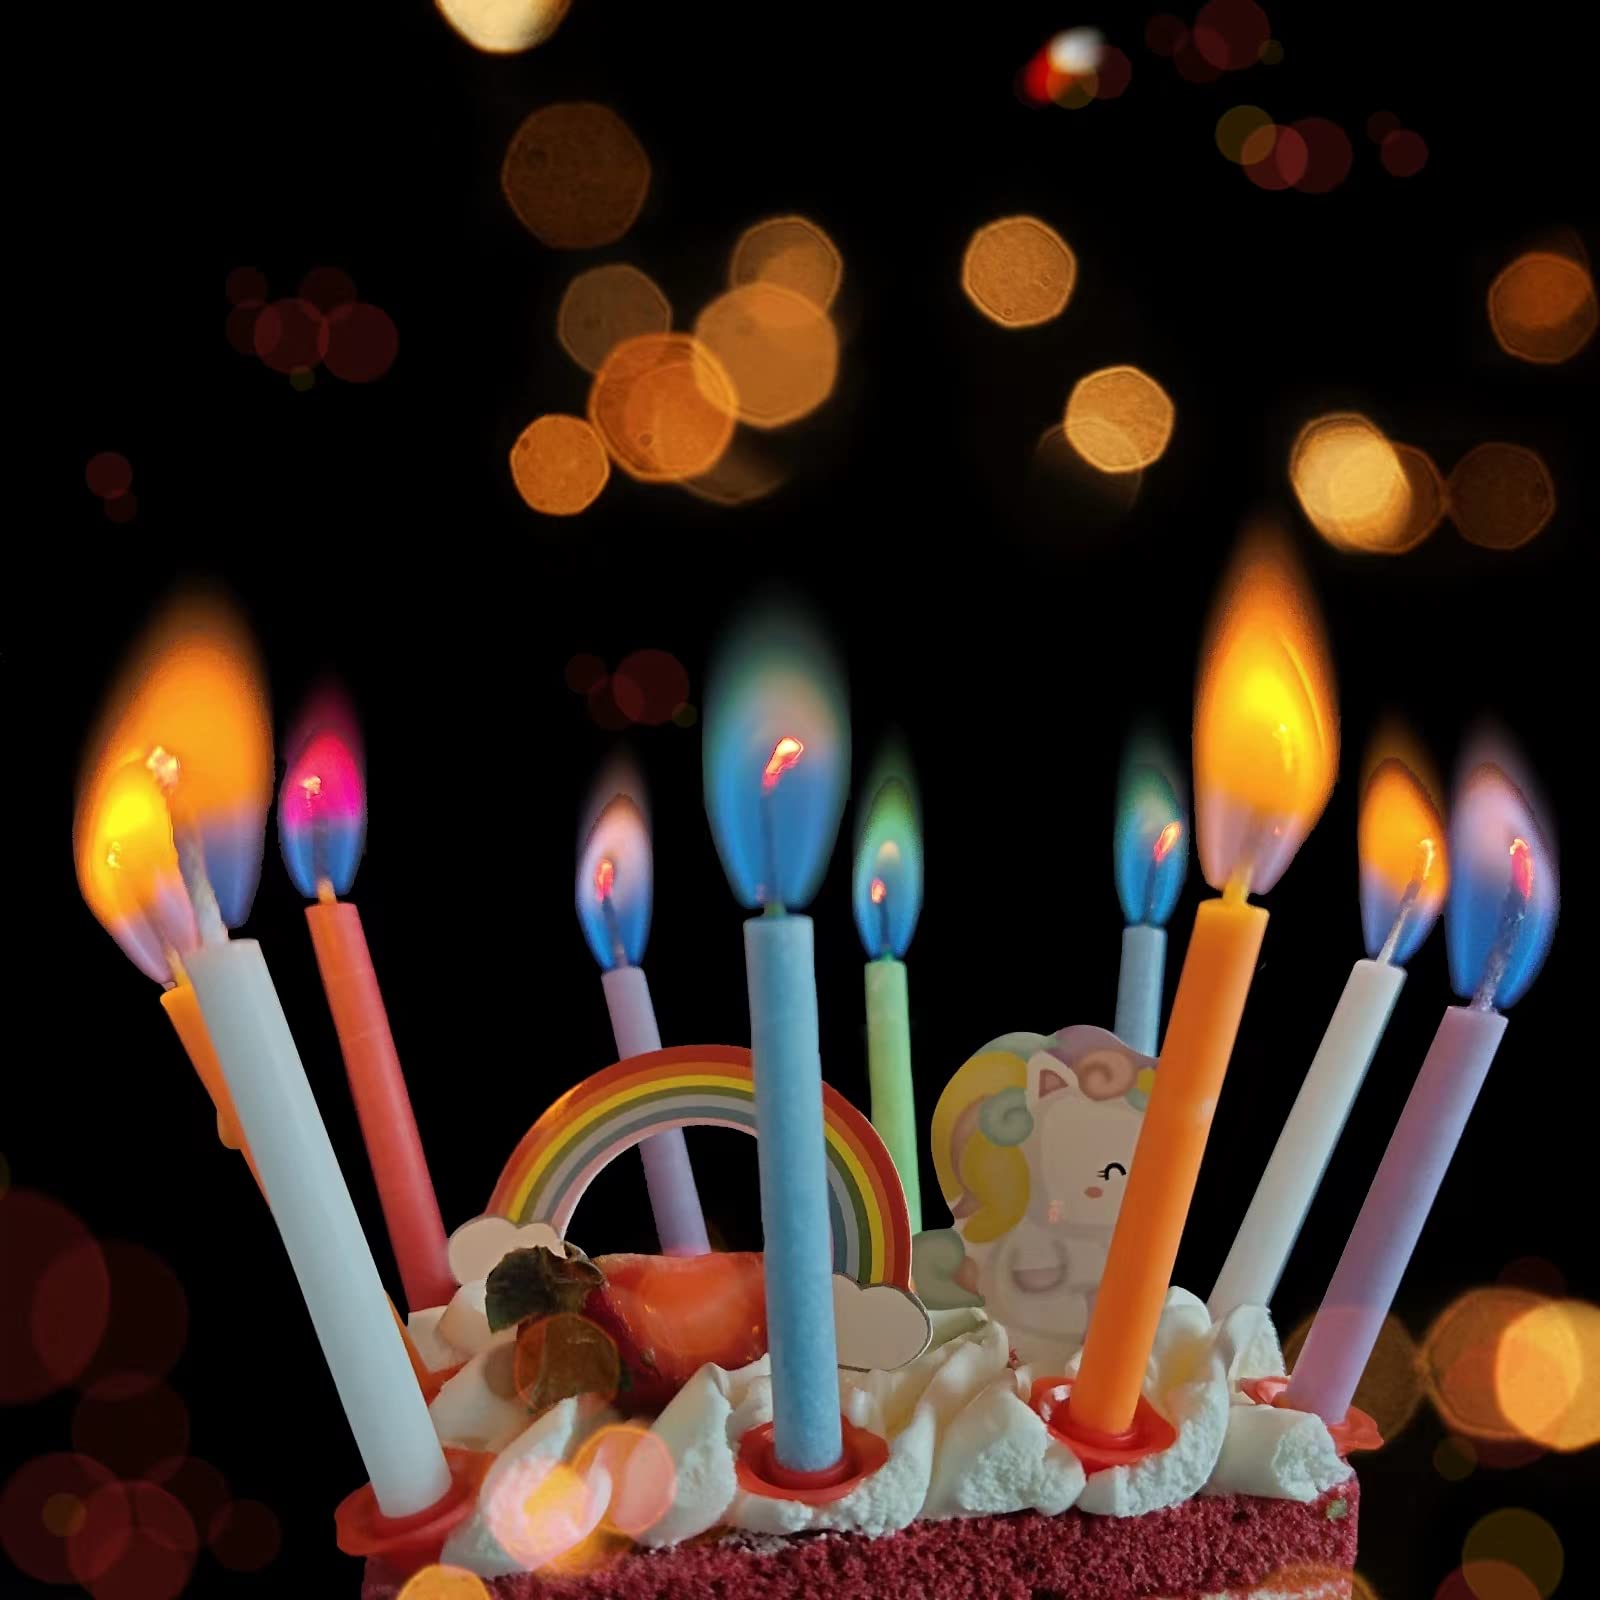 The Best Colored Candles to Match Your Party Theme插图